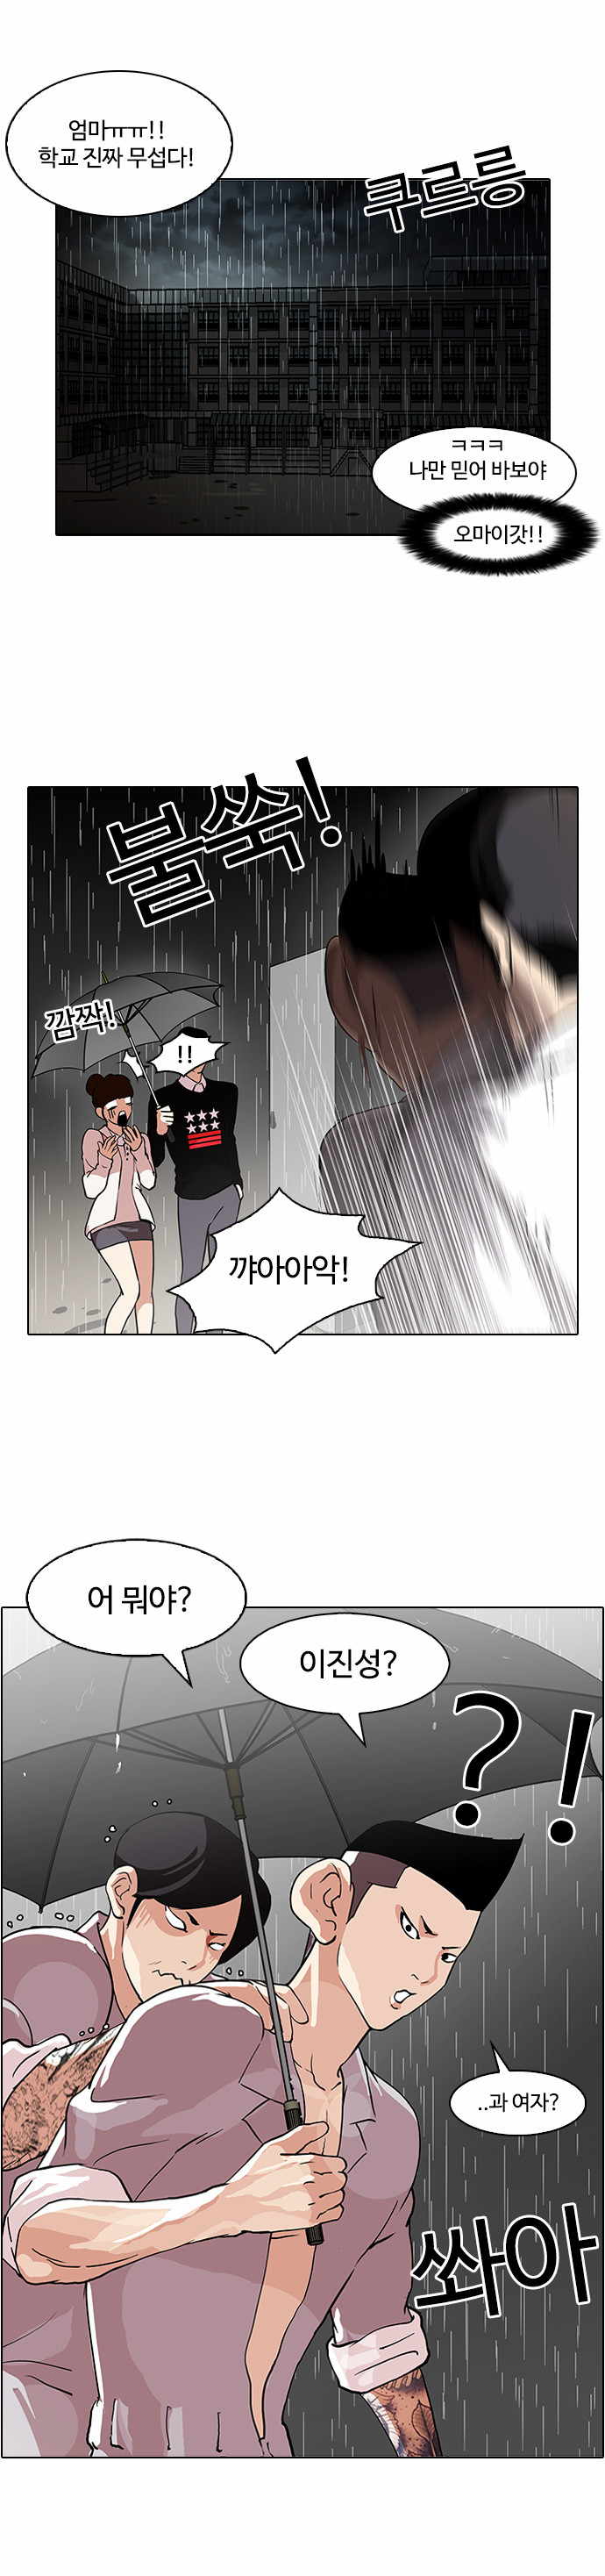 Lookism - Chapter 95 - Page 4